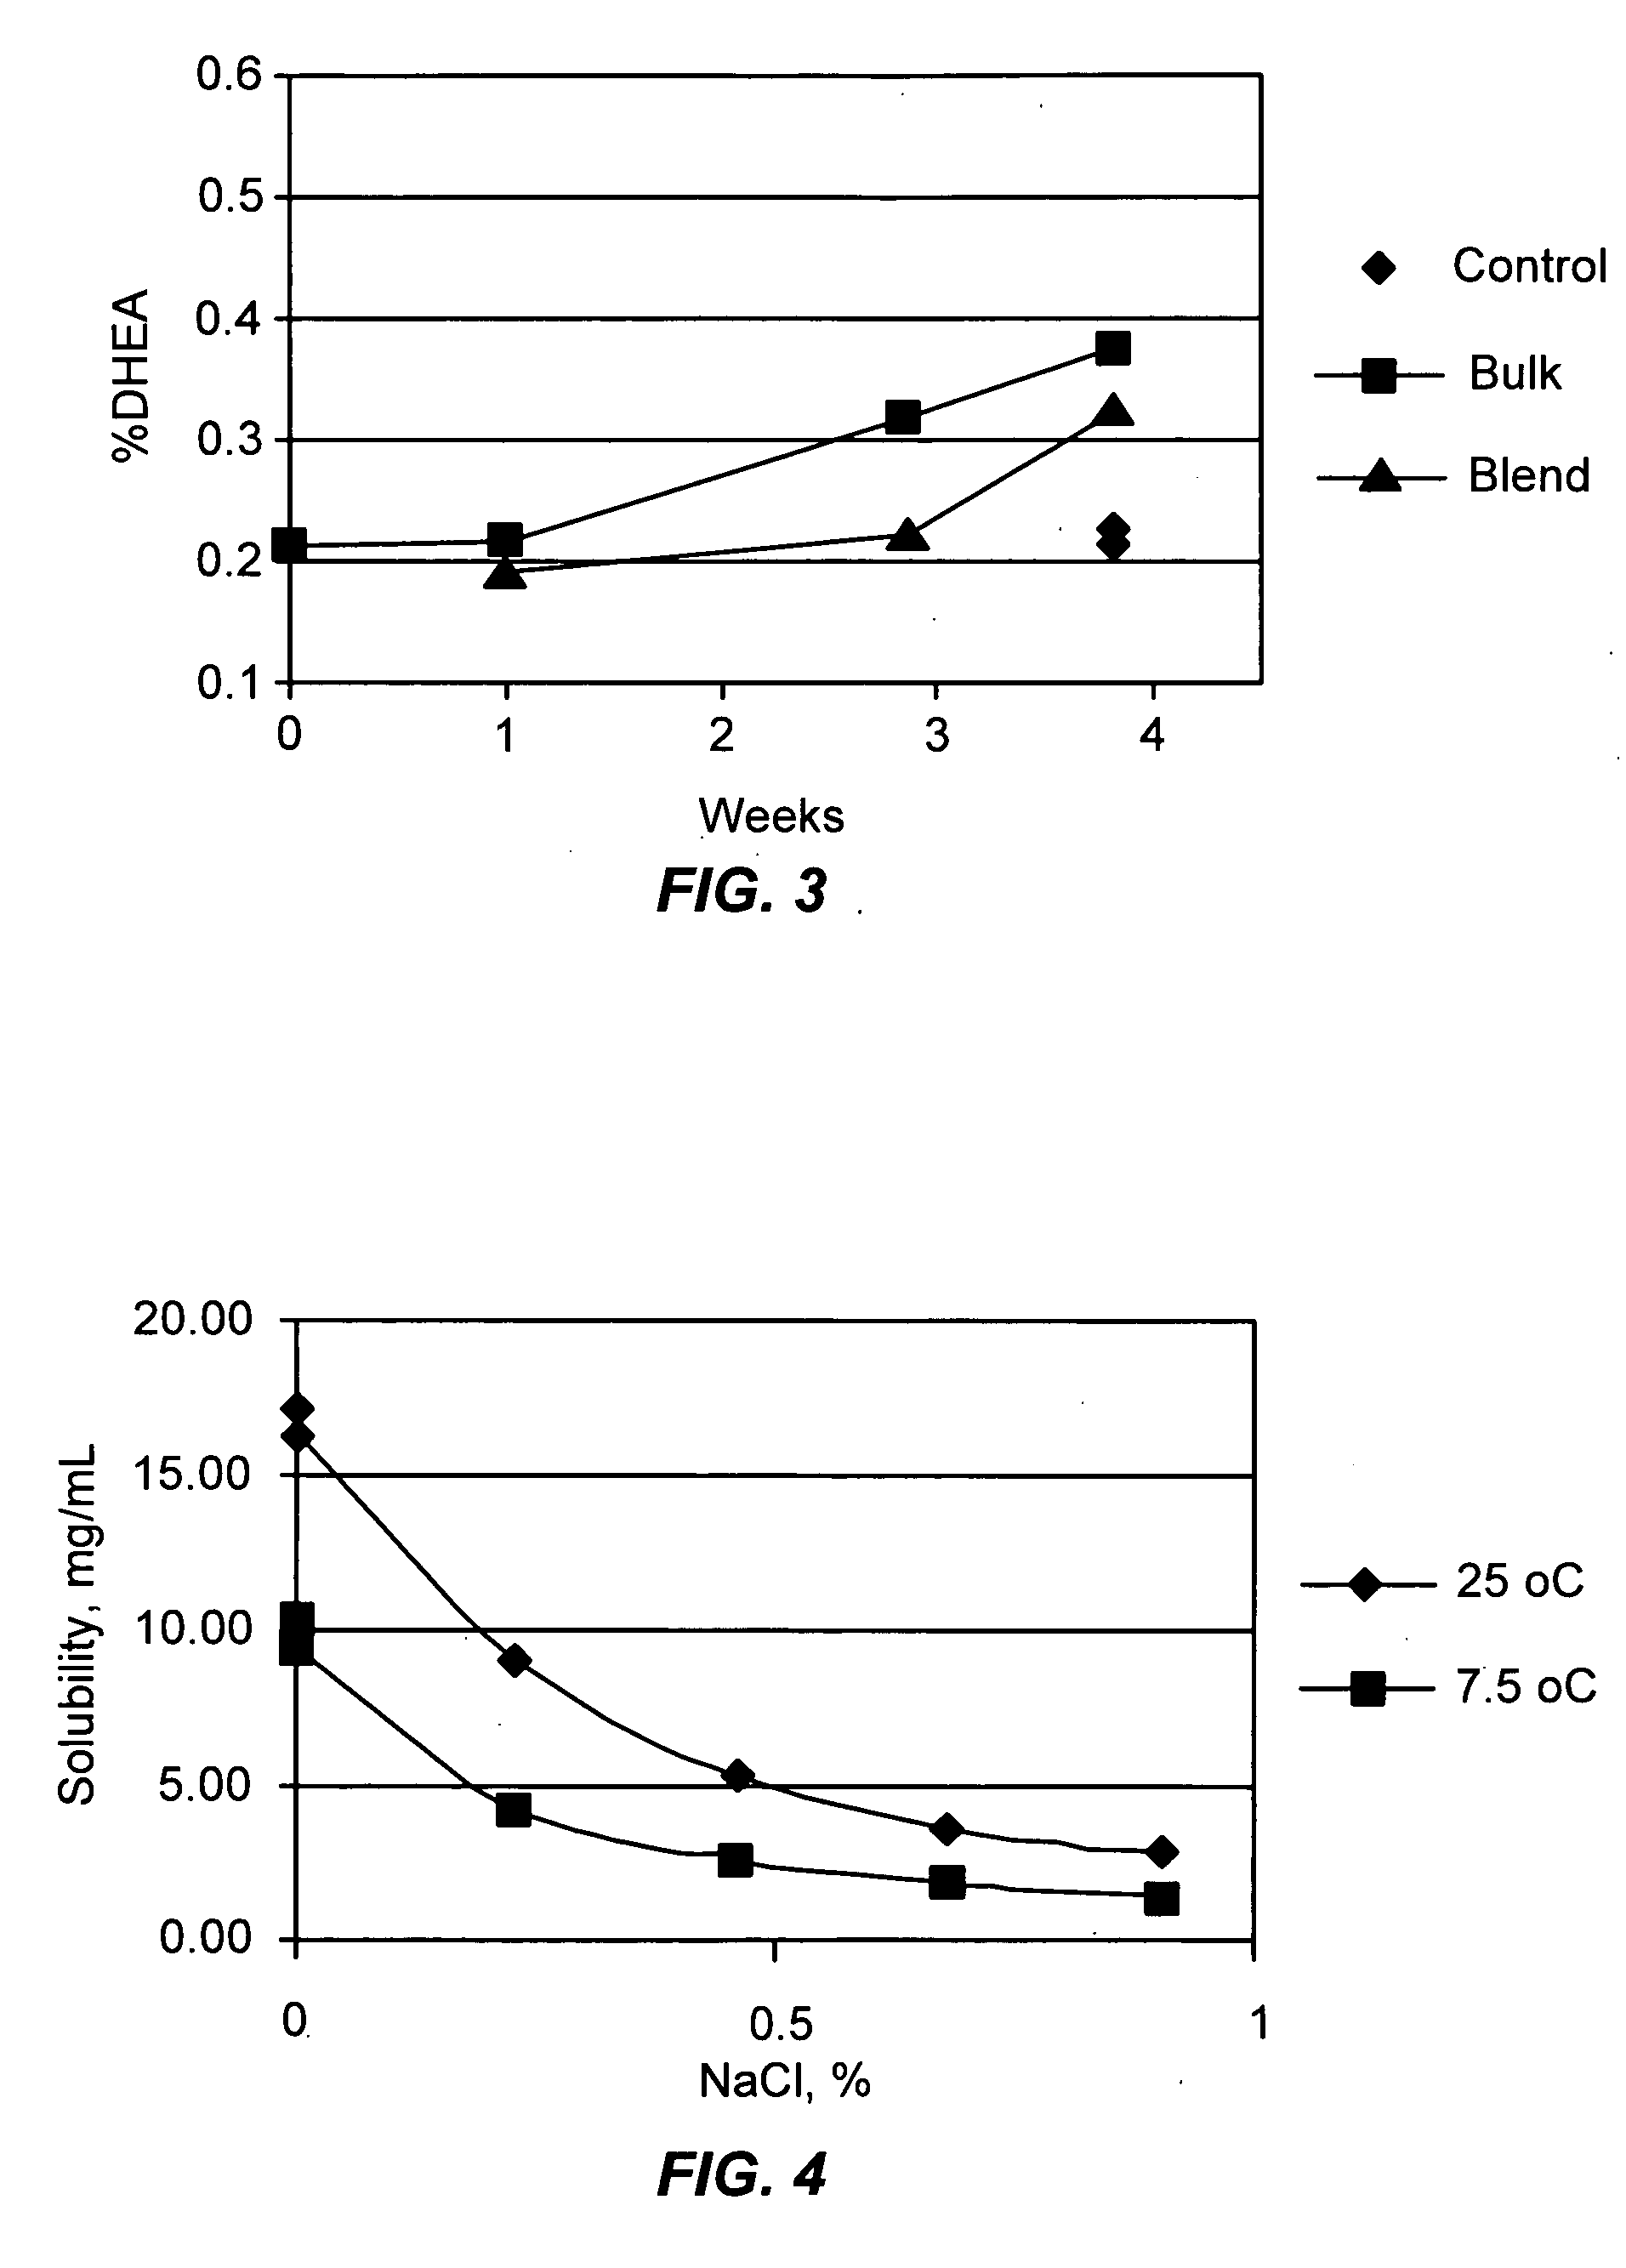 Combination of dehydroepiandrosterone or dehydroepiandrosterone-sulfate with an anticholinergic bronchodilator for treatment of asthma or chronic obstructive pulmonary disease